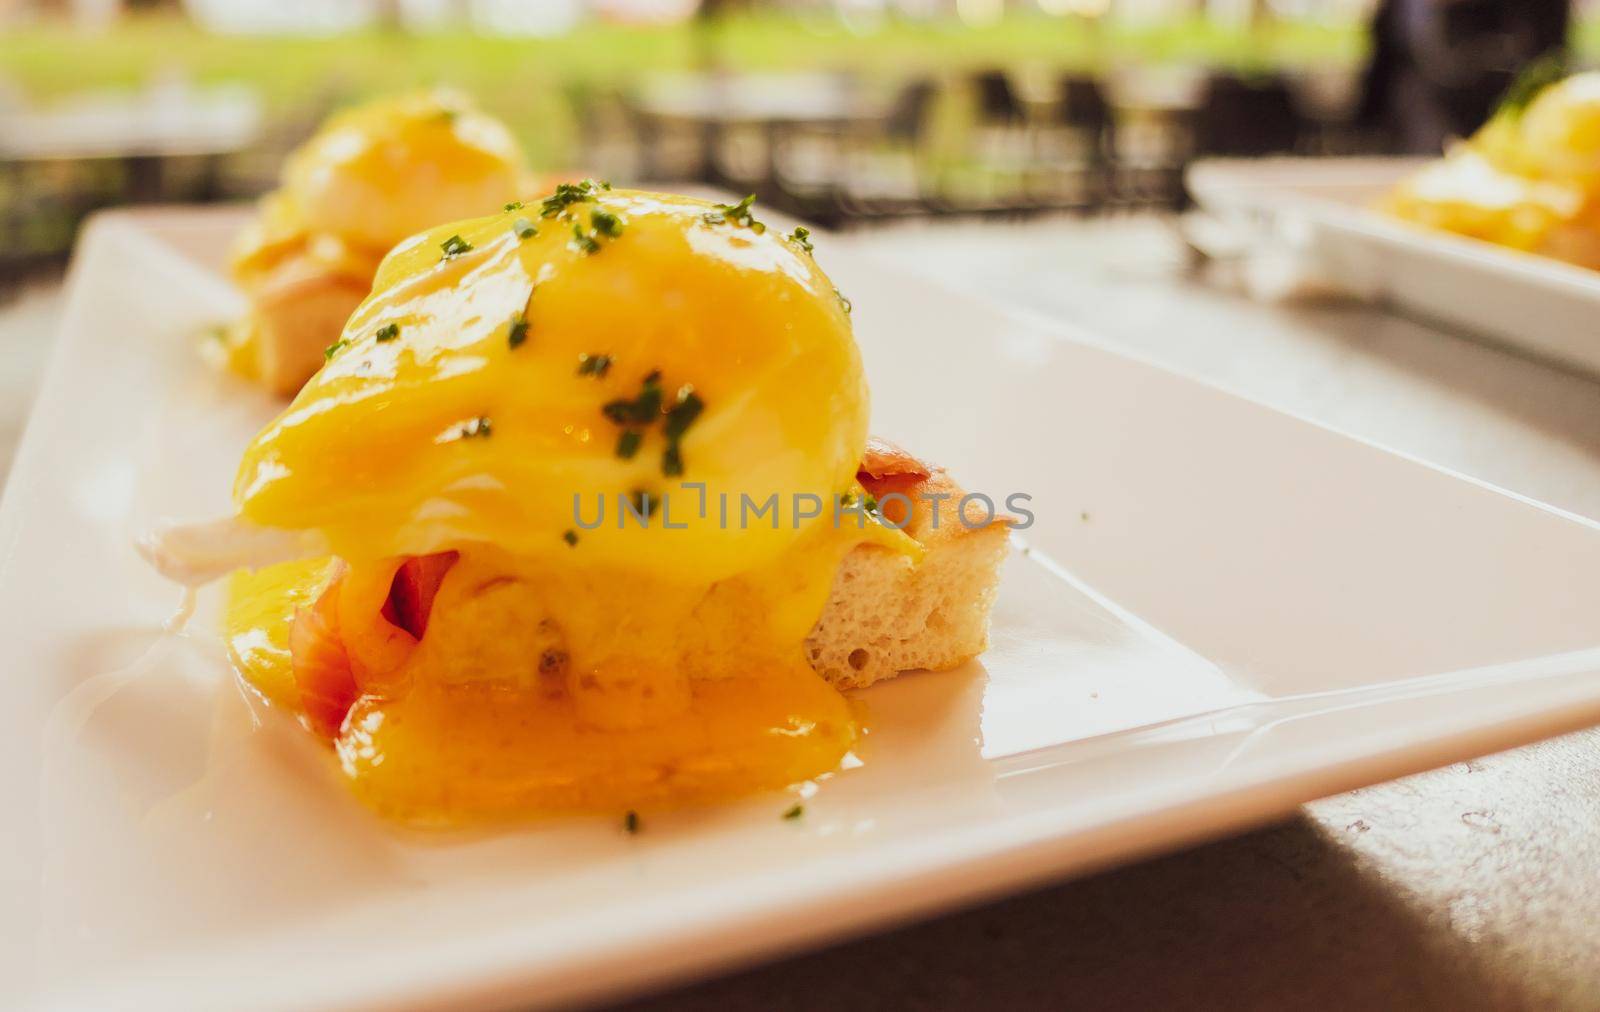 Restaurant service, food recipes and breakfast concept - Poached egg with salmon for brunch in a luxury restaurant